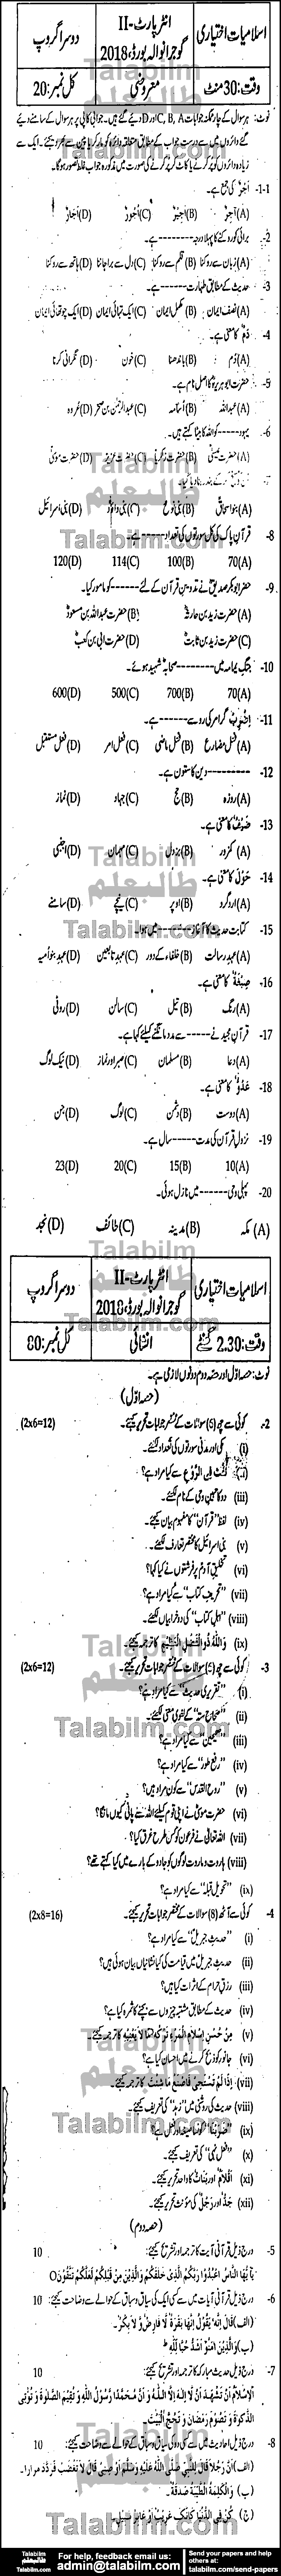 Islamiat Elective 0 past paper for Group-II 2018